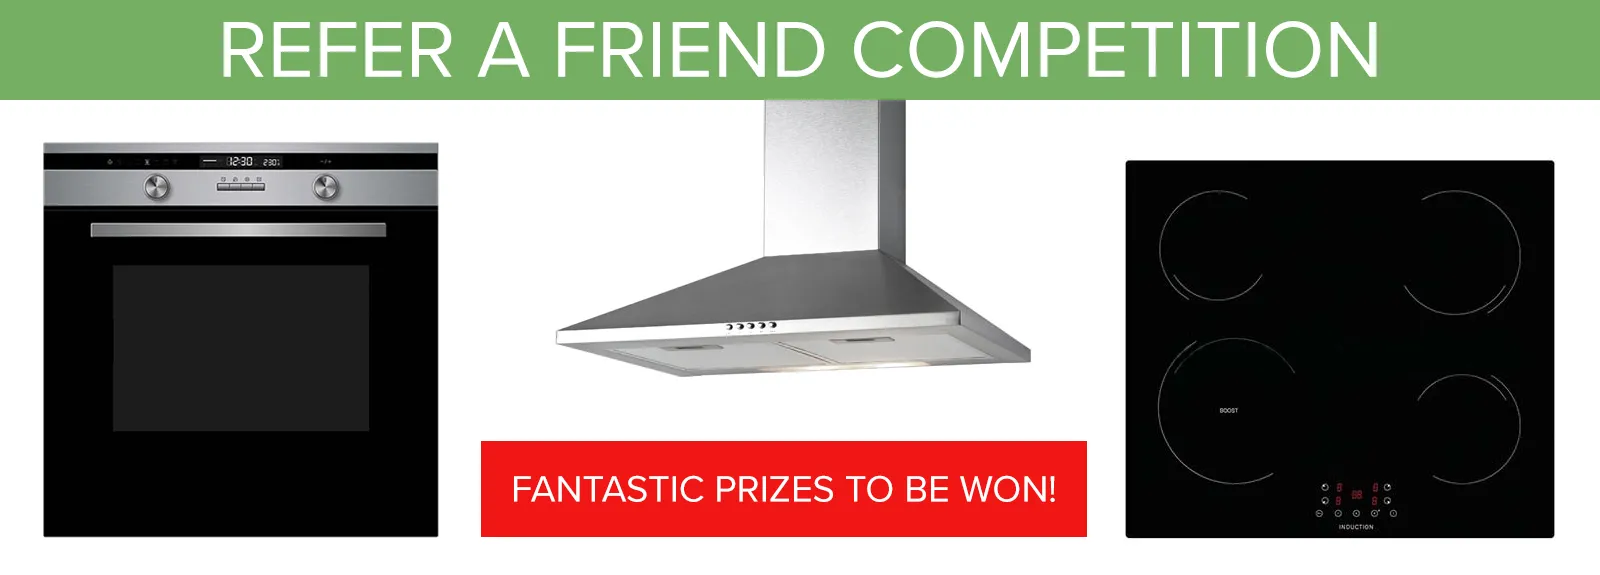 Refer a Friend Competition - Fantastic Prizes to be Won